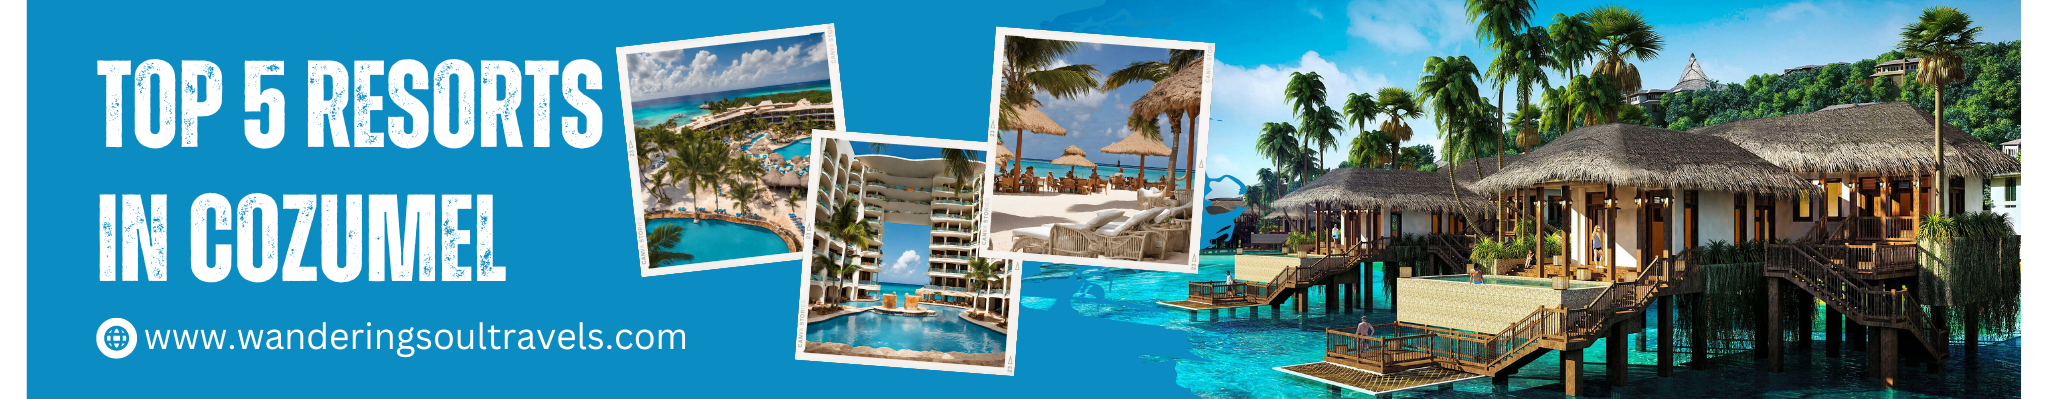 Page about the top 5 Resorts of Cozumel Mexico